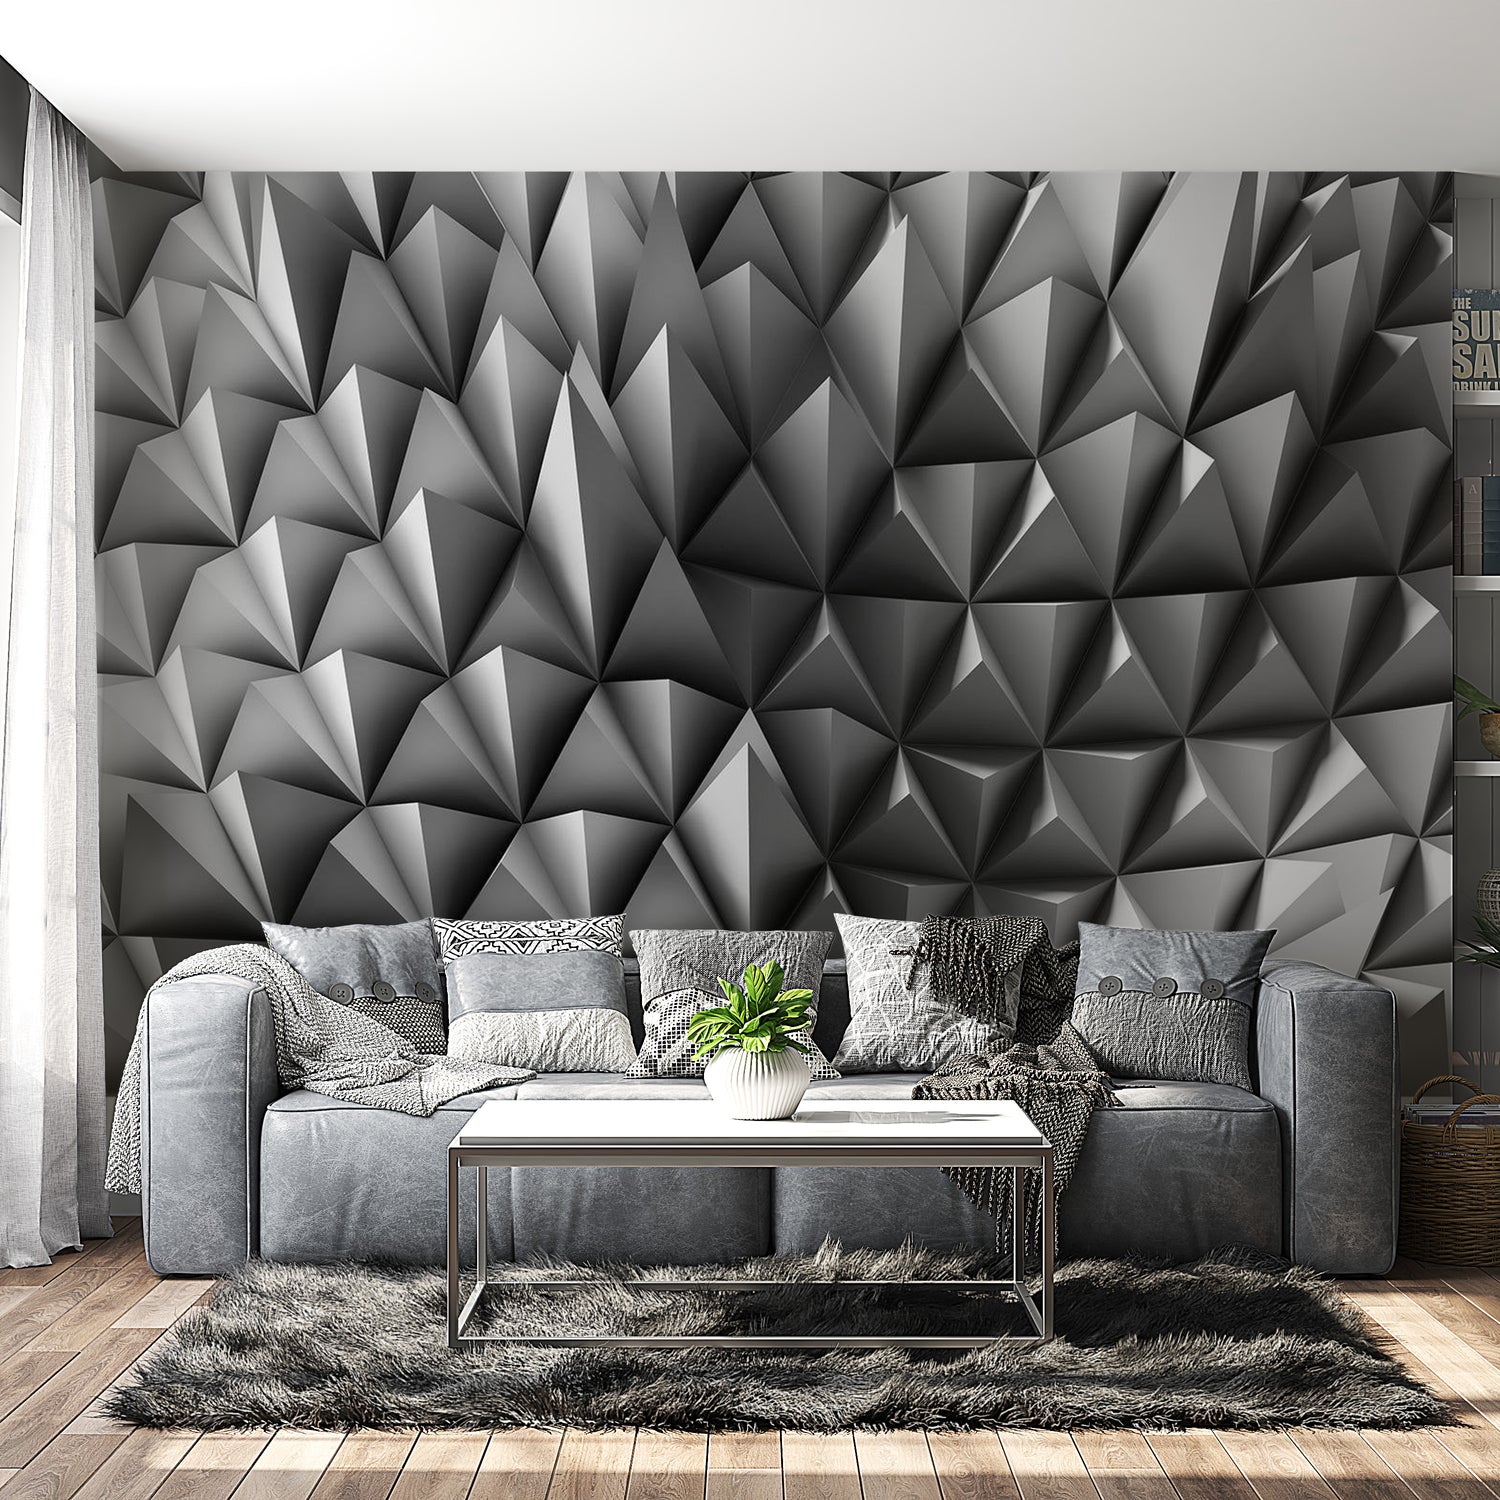 Peel & Stick 3D Illusion Wall Mural - Spiky Identity - Removable Wall Decals